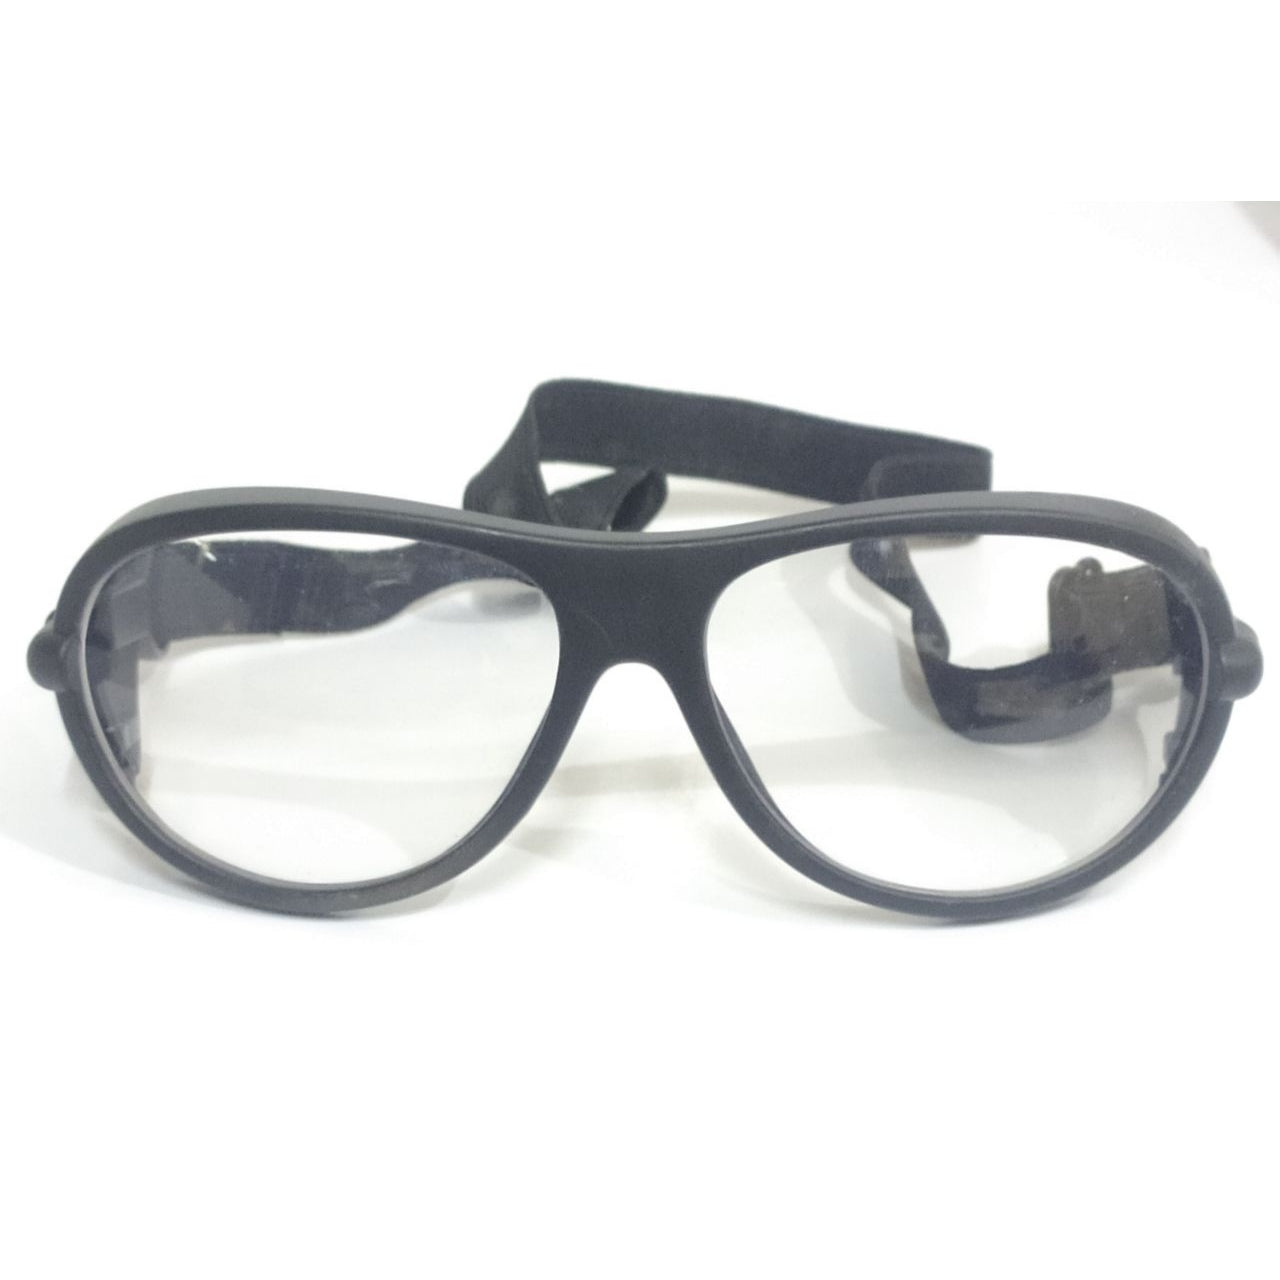 Black Frame Clear Lens Biker Cycling Driving Glasses Sunglasses with Strap Prescription Possible